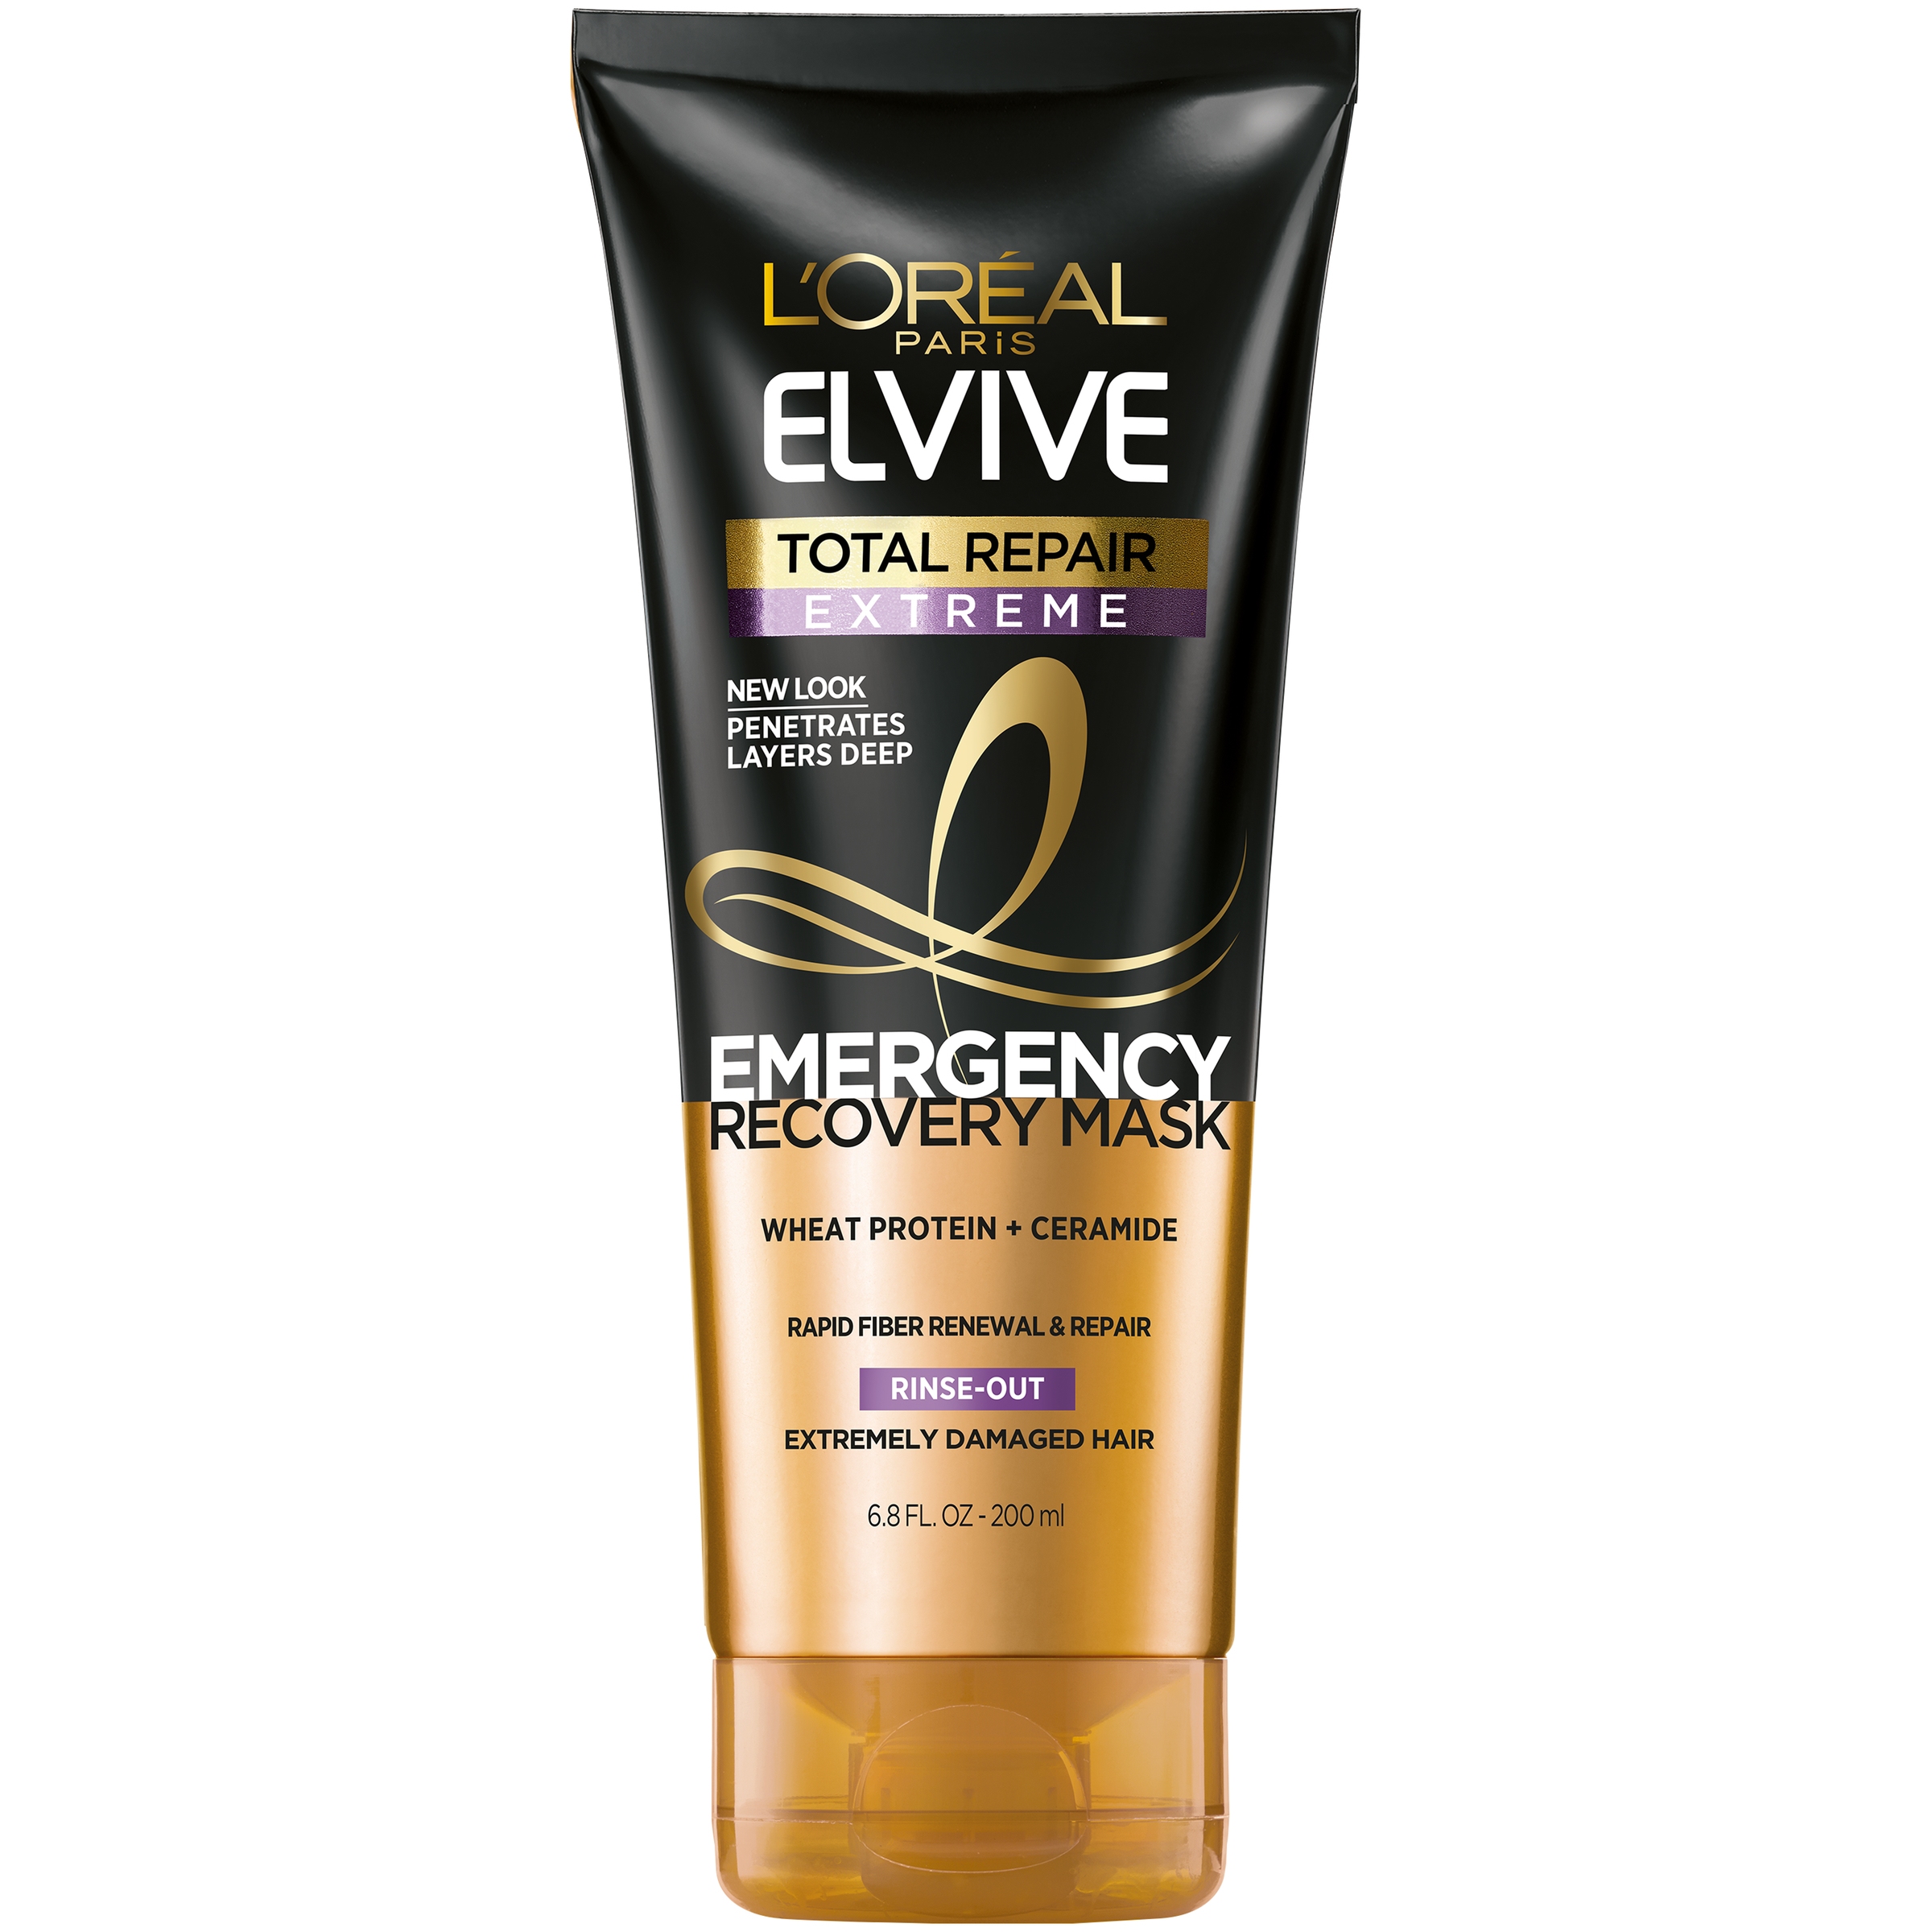 L'Oreal Paris Elvive Total Repair Extreme Emergency Recovery Mask, 6.8 fl. oz. - image 1 of 6